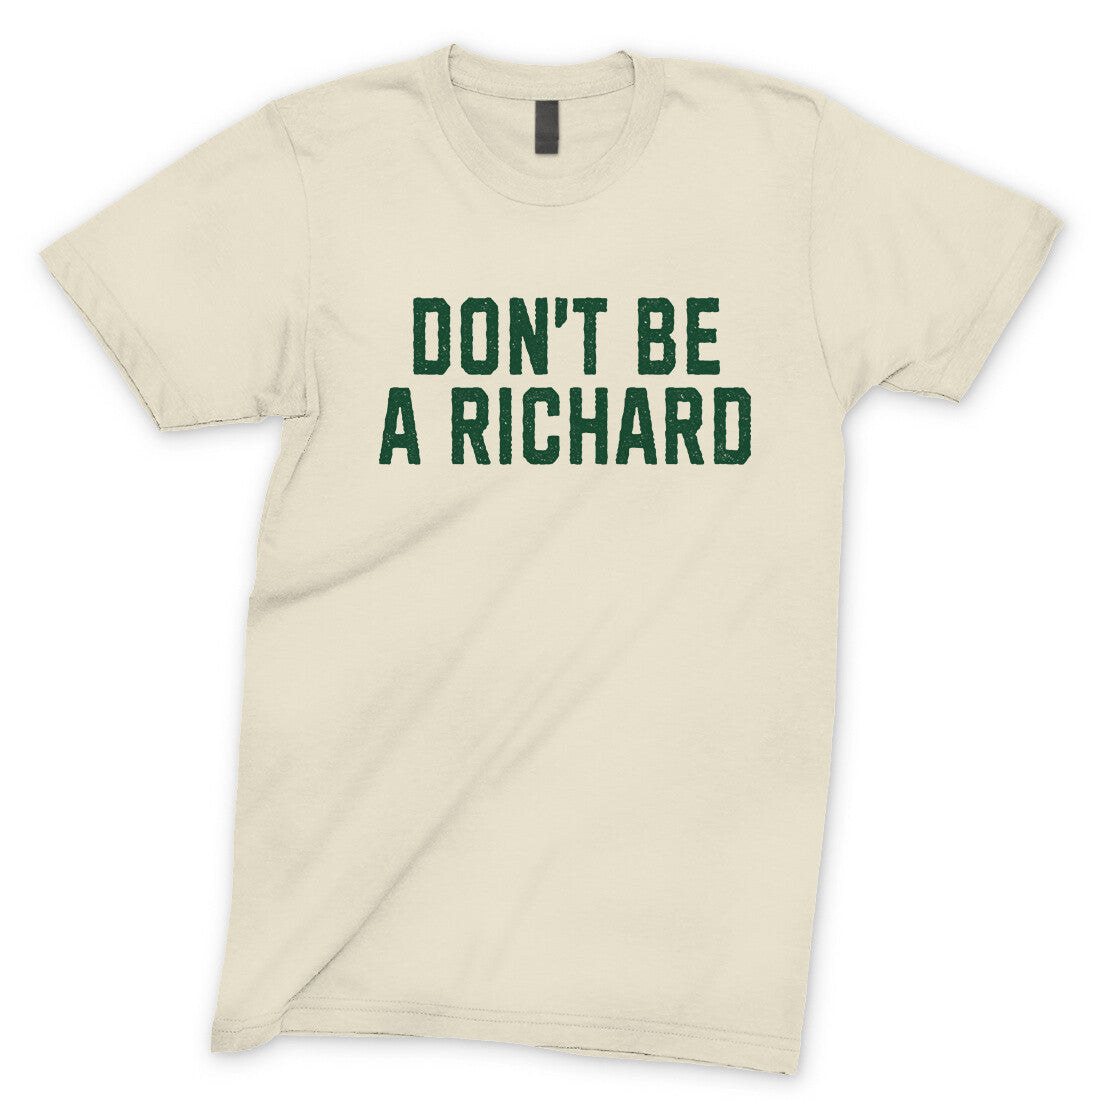 Don't Be a Richard in Natural Color